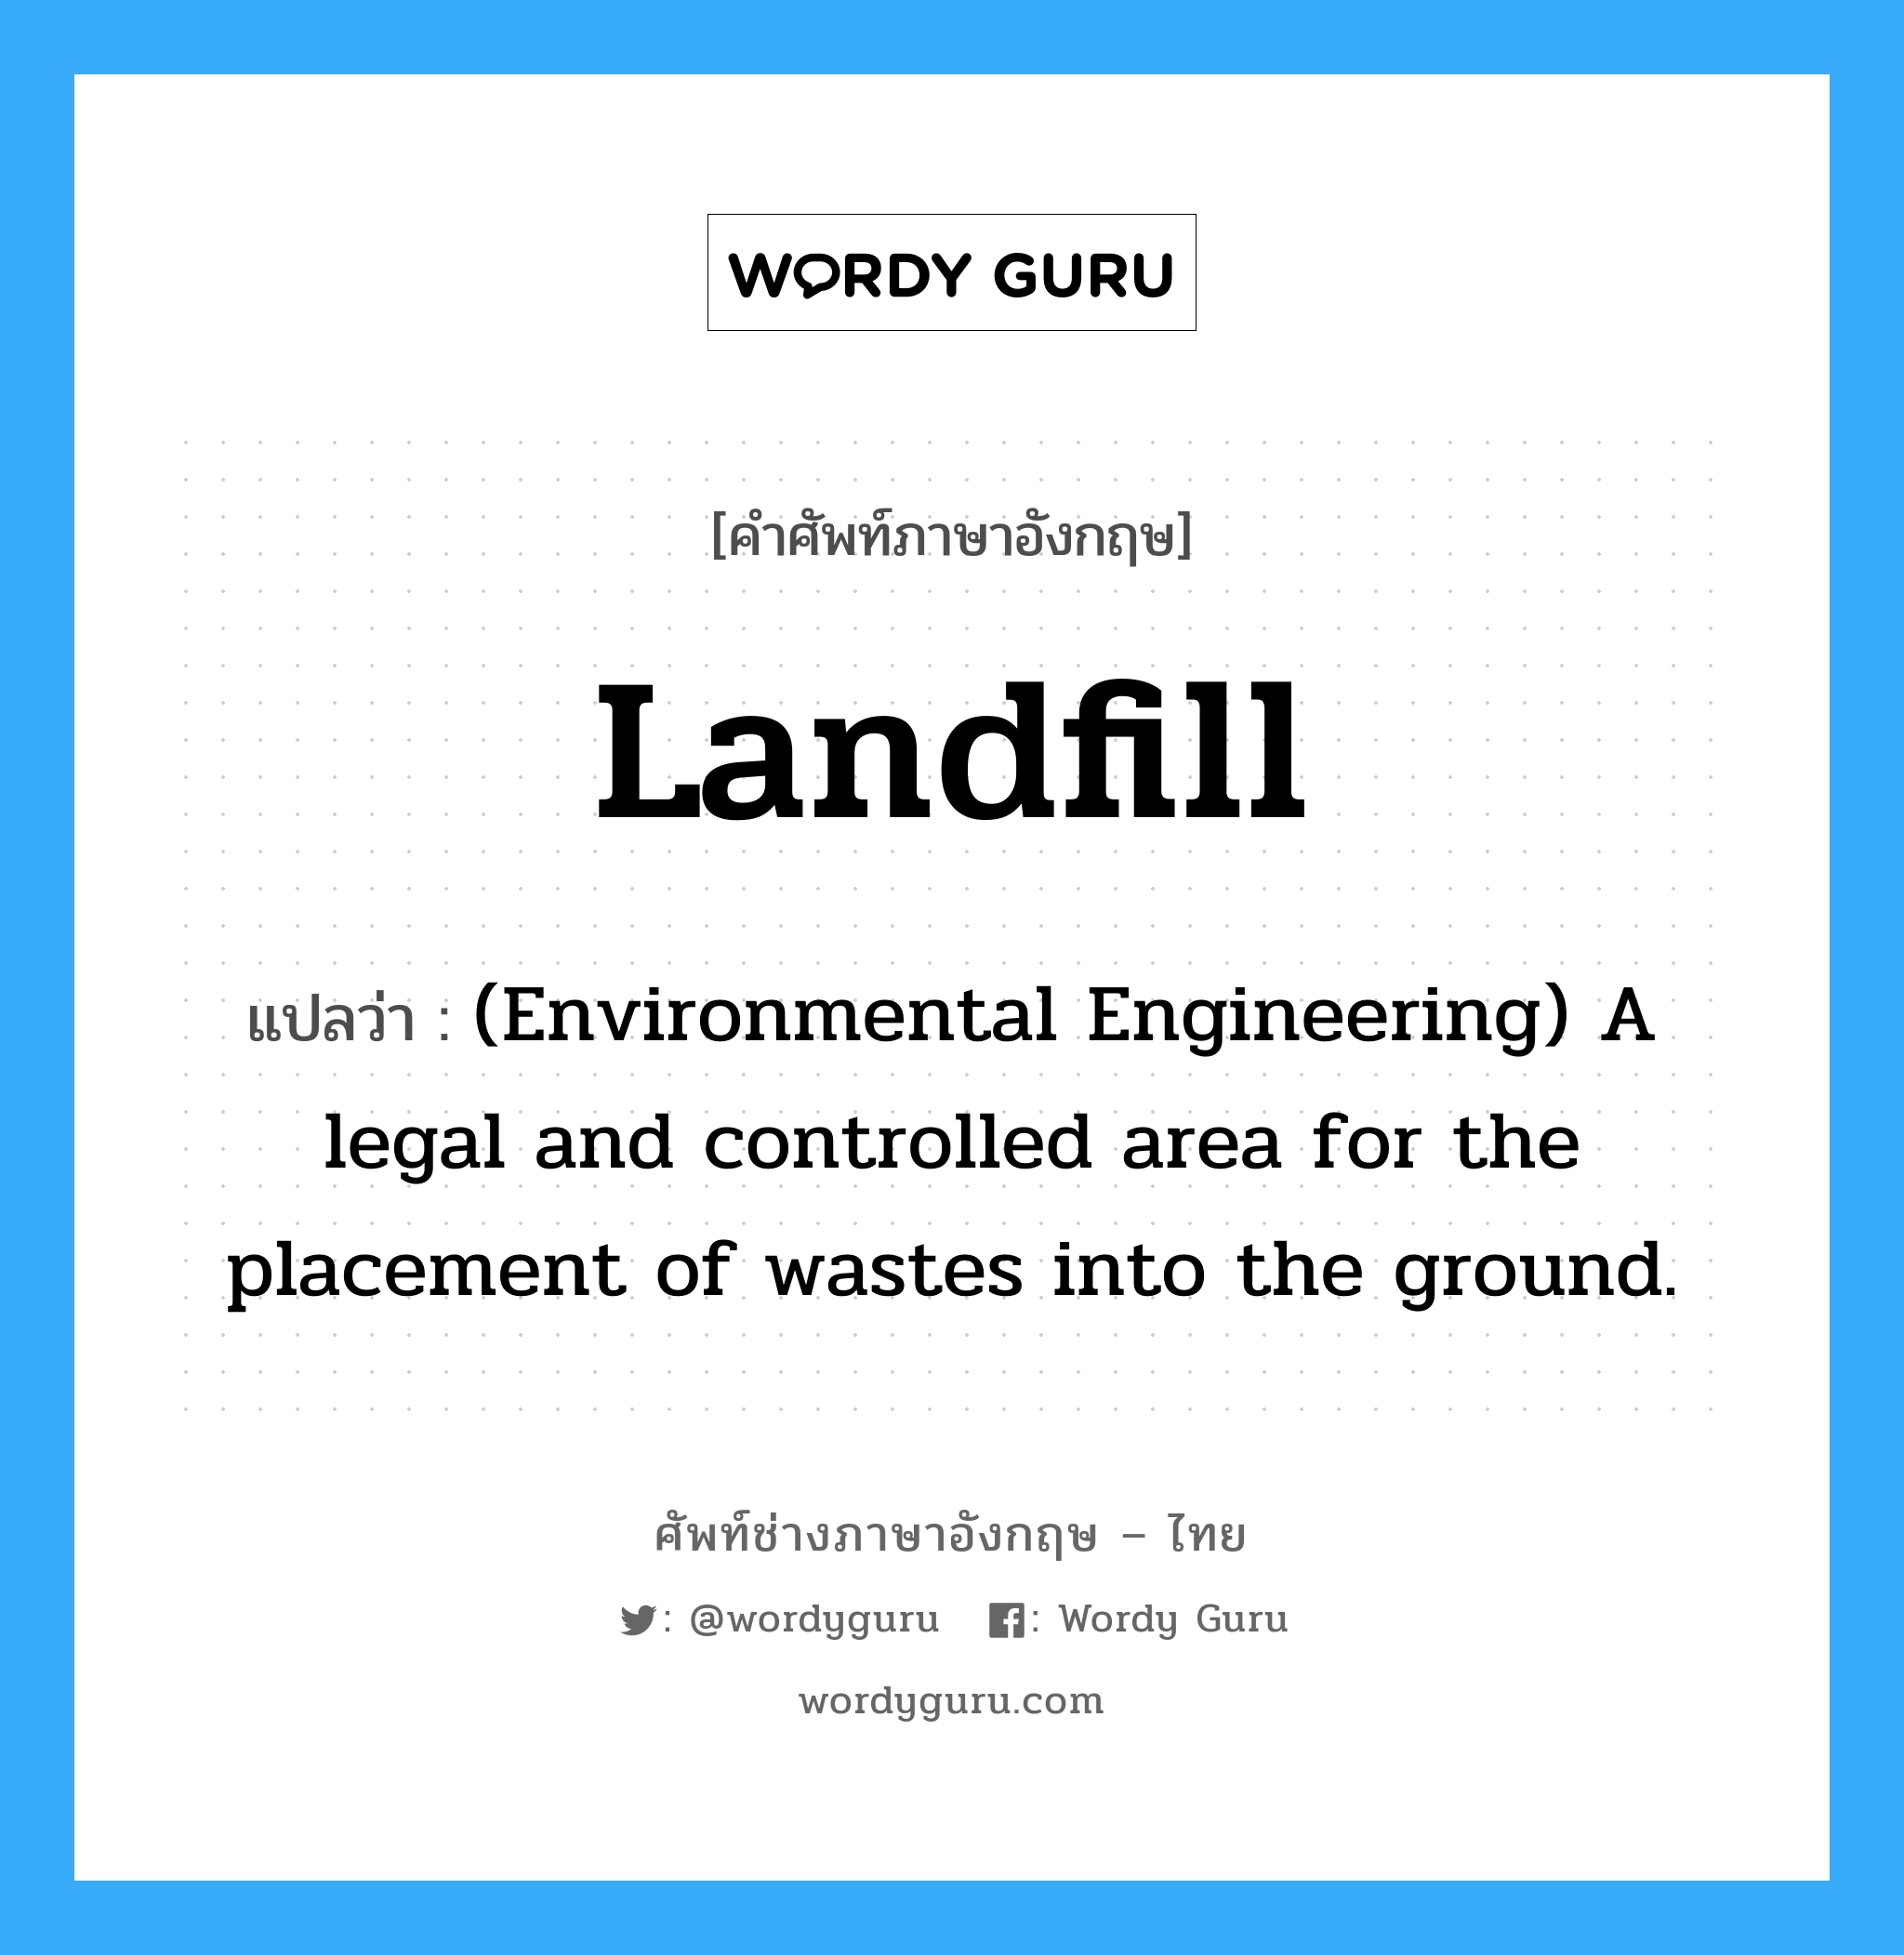 (Environmental Engineering) A legal and controlled area for the placement of wastes into the ground. ภาษาอังกฤษ?, คำศัพท์ช่างภาษาอังกฤษ - ไทย (Environmental Engineering) A legal and controlled area for the placement of wastes into the ground. คำศัพท์ภาษาอังกฤษ (Environmental Engineering) A legal and controlled area for the placement of wastes into the ground. แปลว่า Landfill